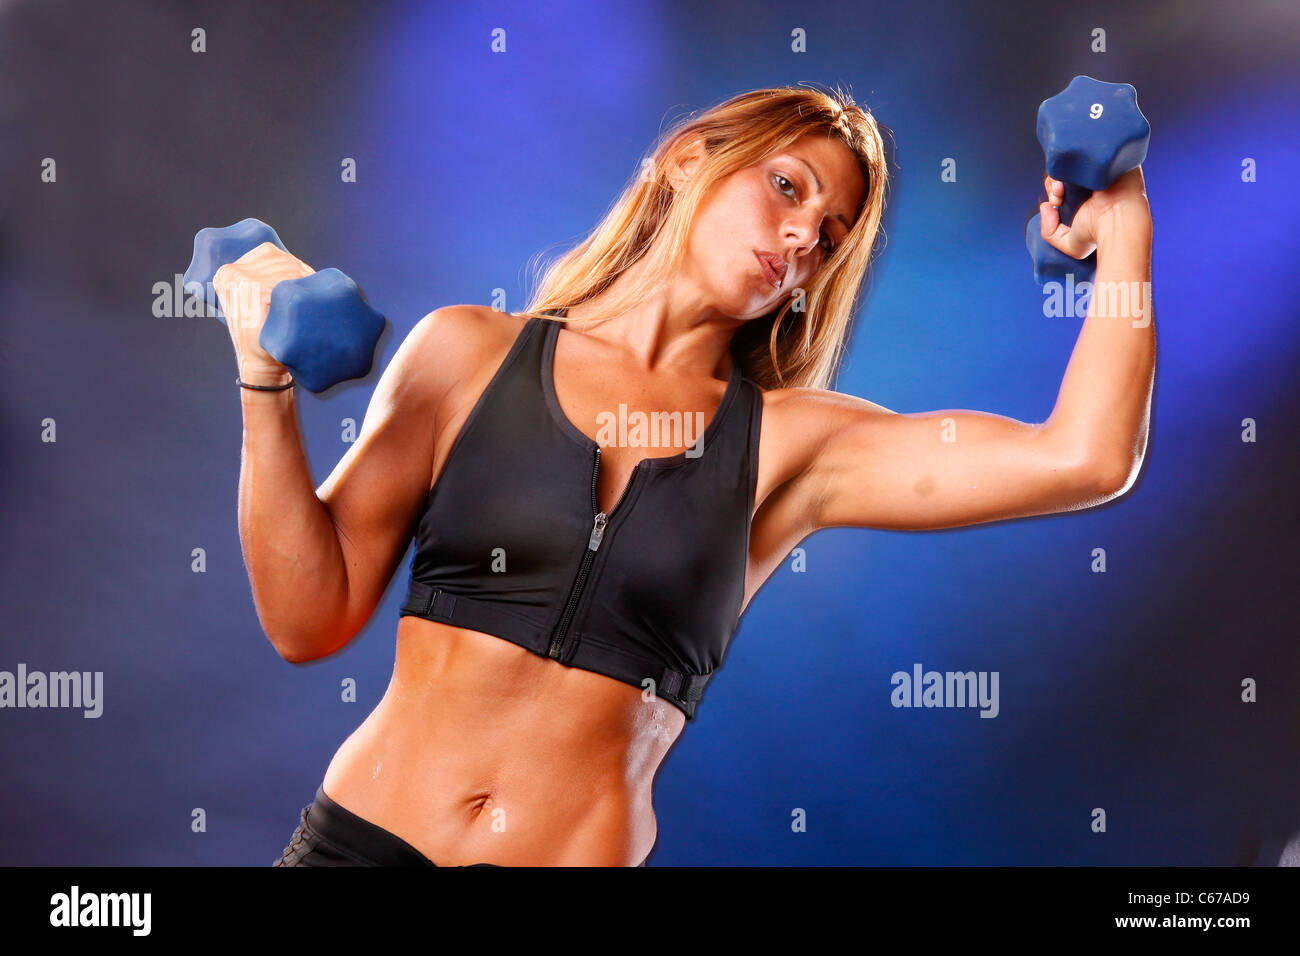 Toned blond working out with dumbells Stock Photo